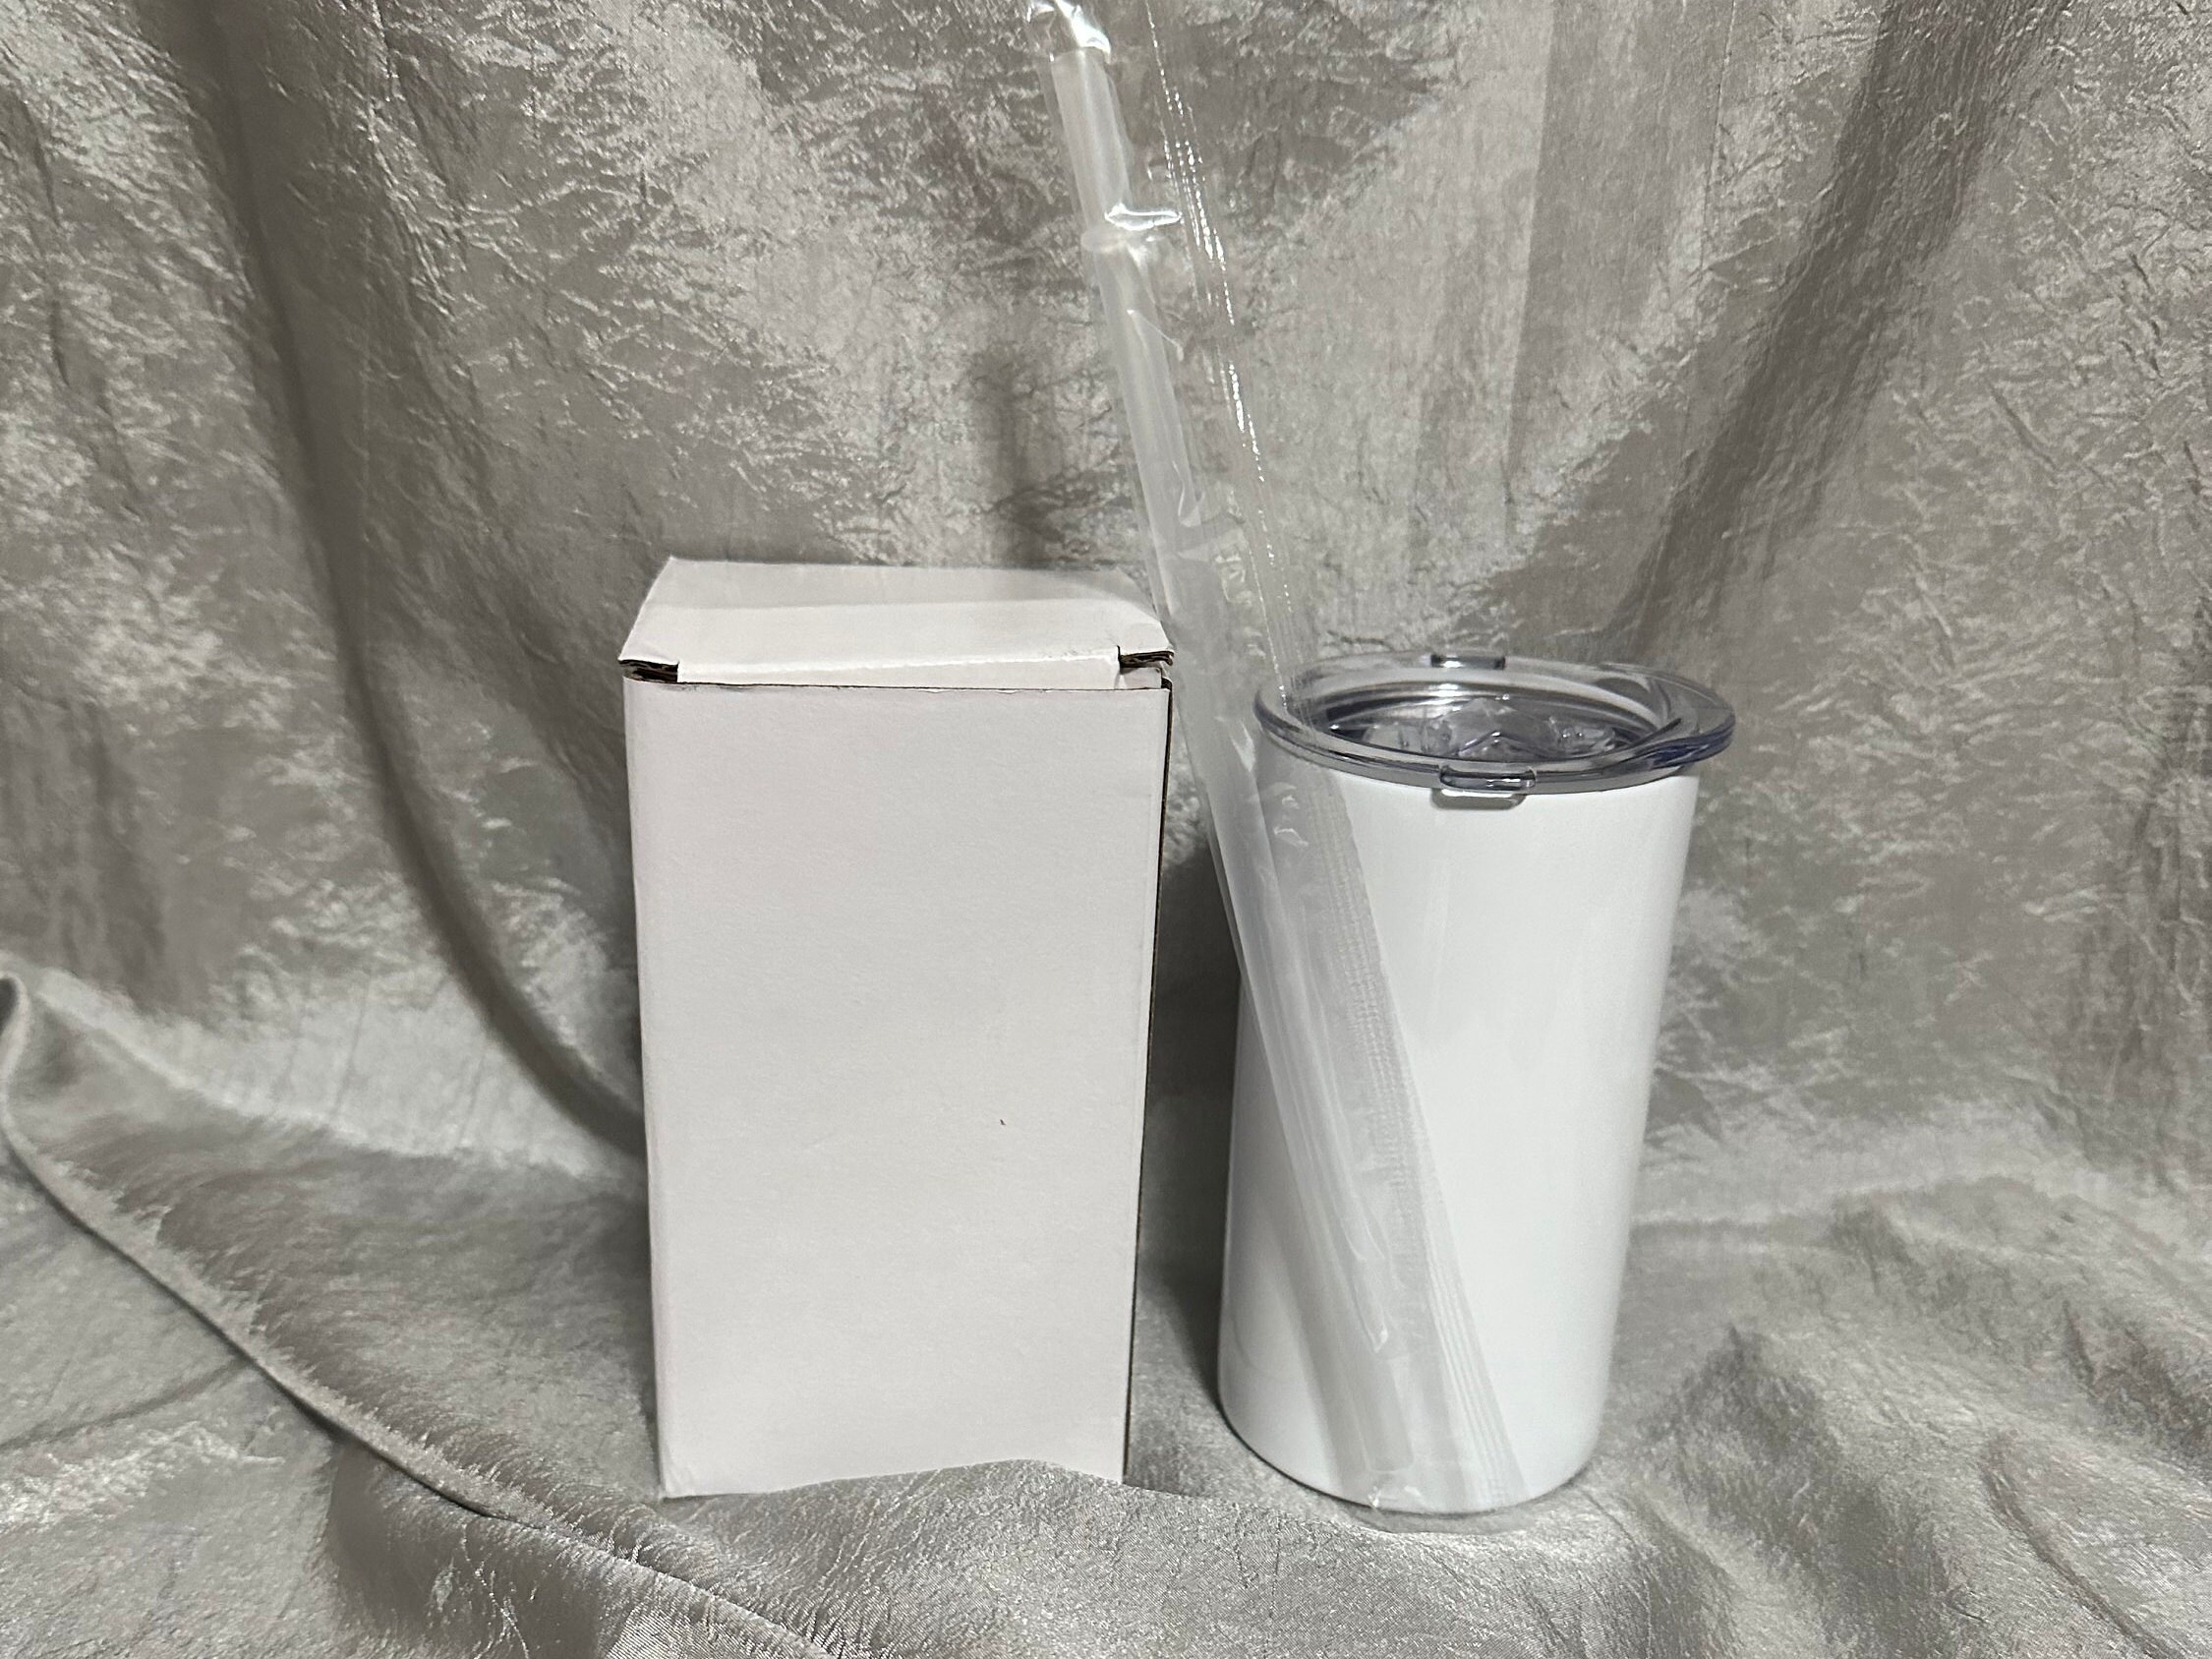 12oz Straight White Blank Tumblers 25 Pack Free Shipping 